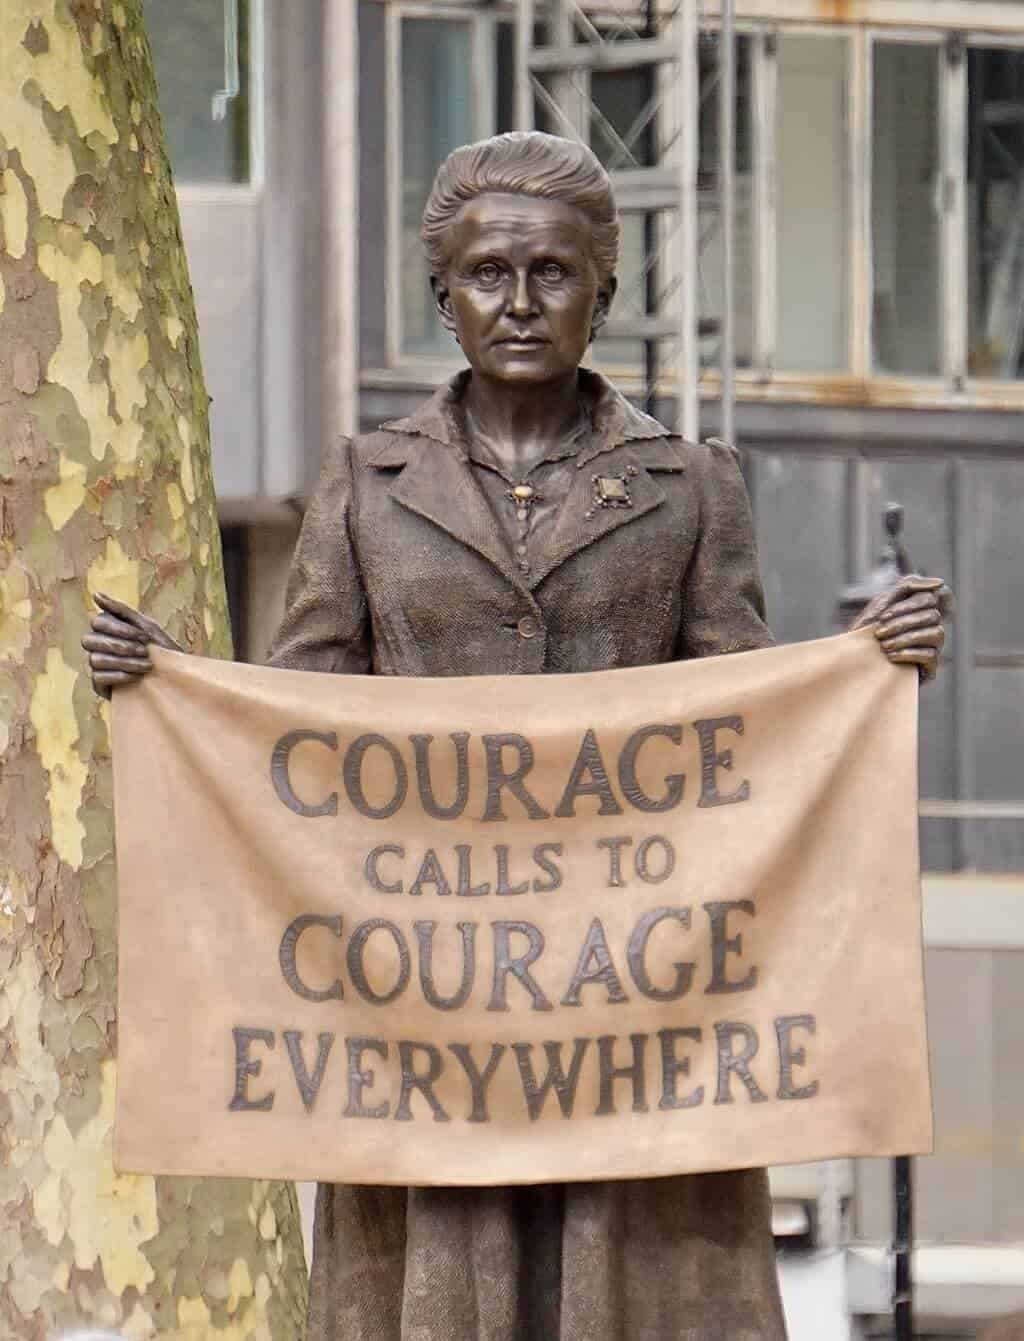 "The statue - unveiled at last", Millicent Fawcett statue unveiled, 2018. Photographer: Garry Knight. Courtesy of Wikimedia Commons.